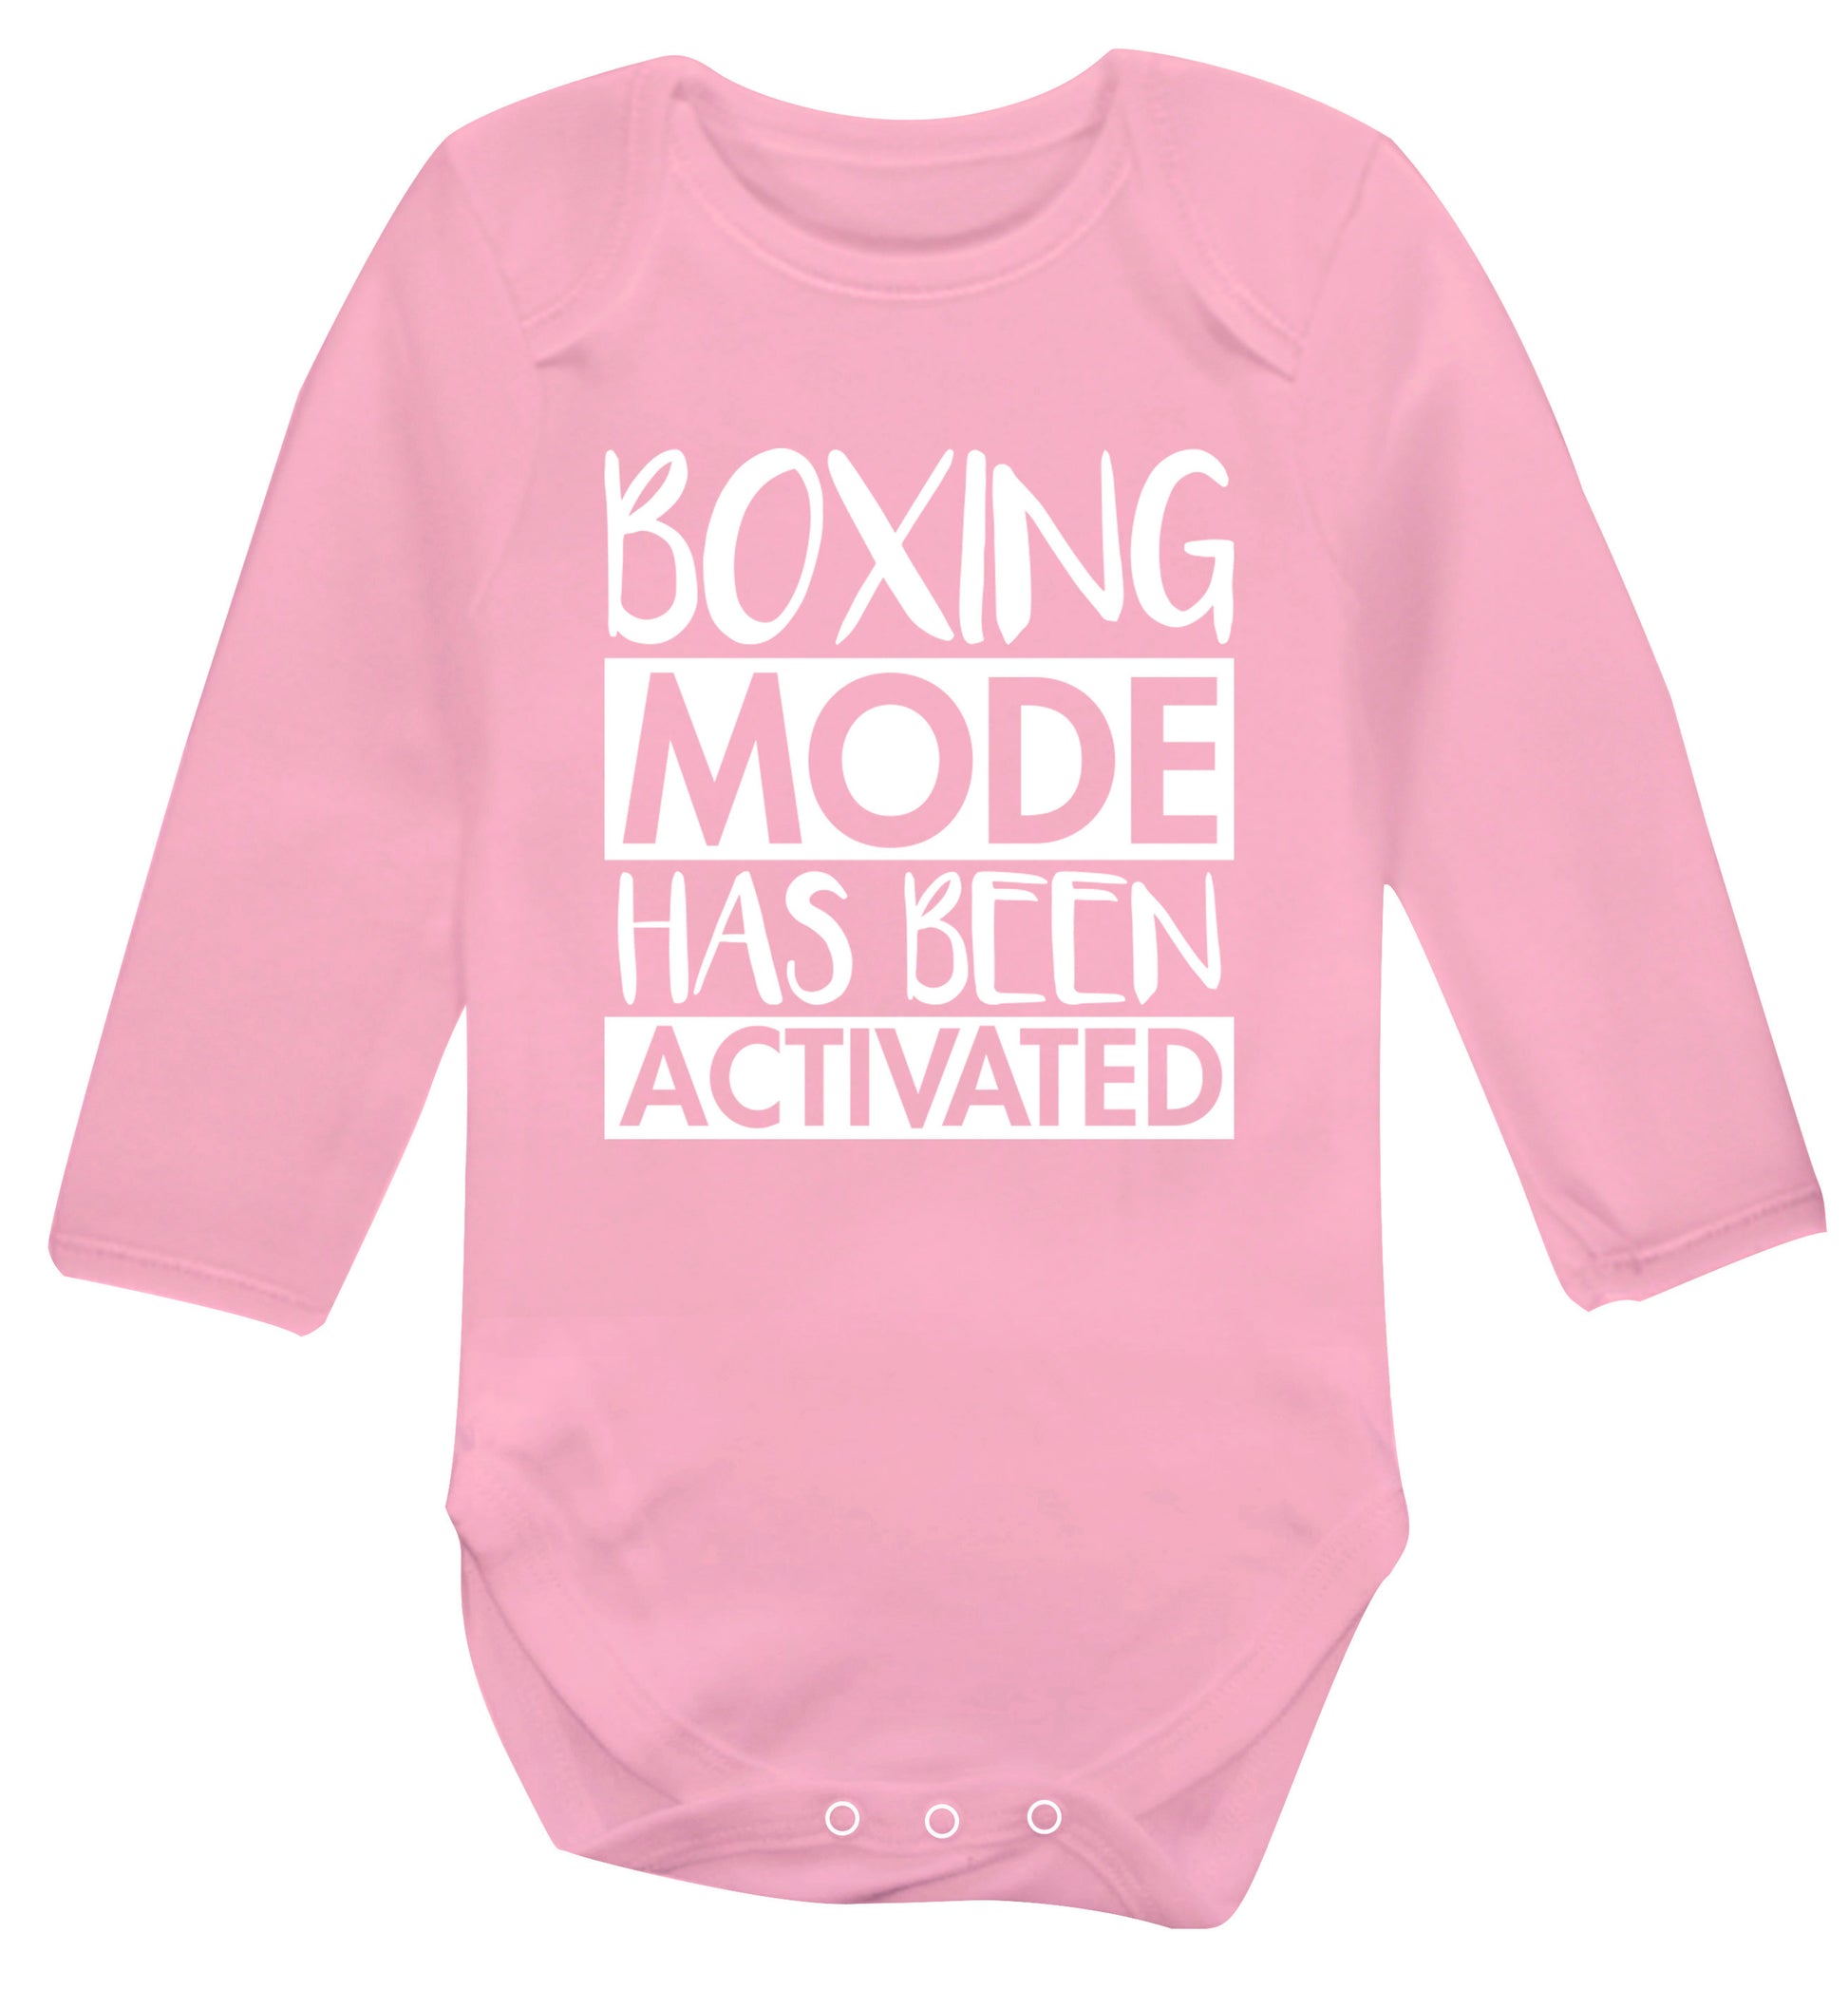 Boxing mode activated Baby Vest long sleeved pale pink 6-12 months